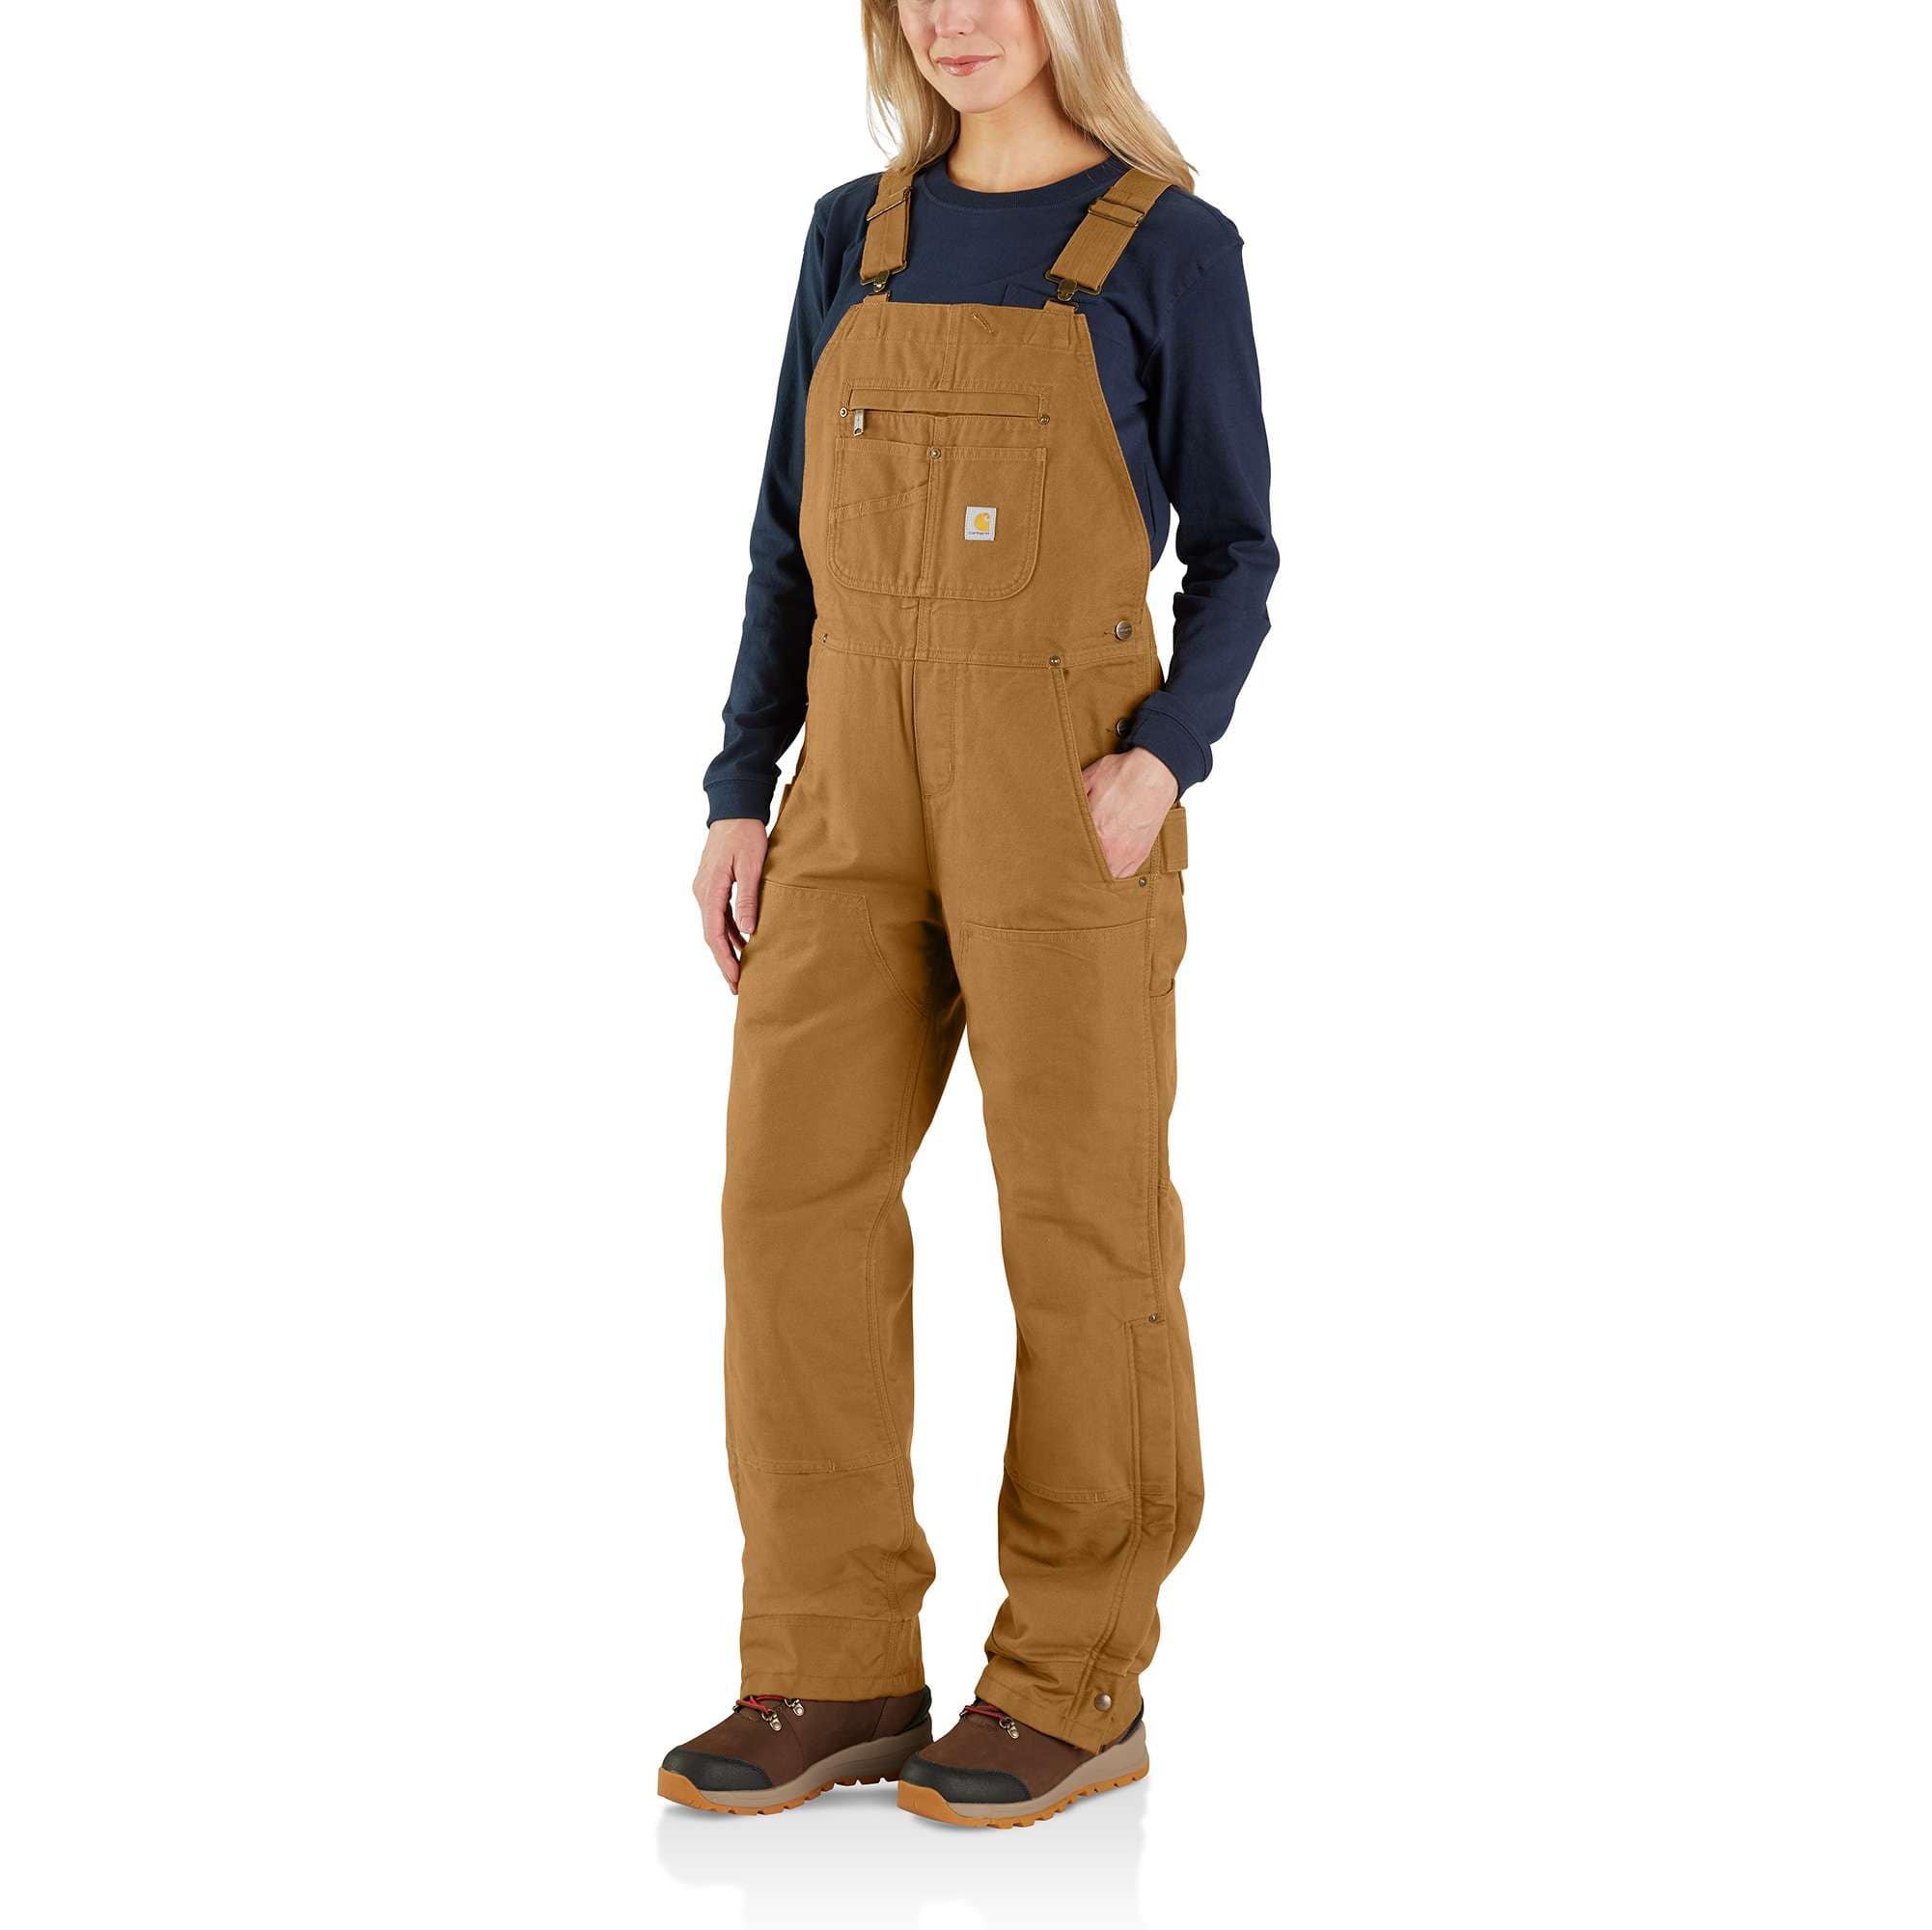 Insulated workwear overalls for the win. The fit on these Carhartt